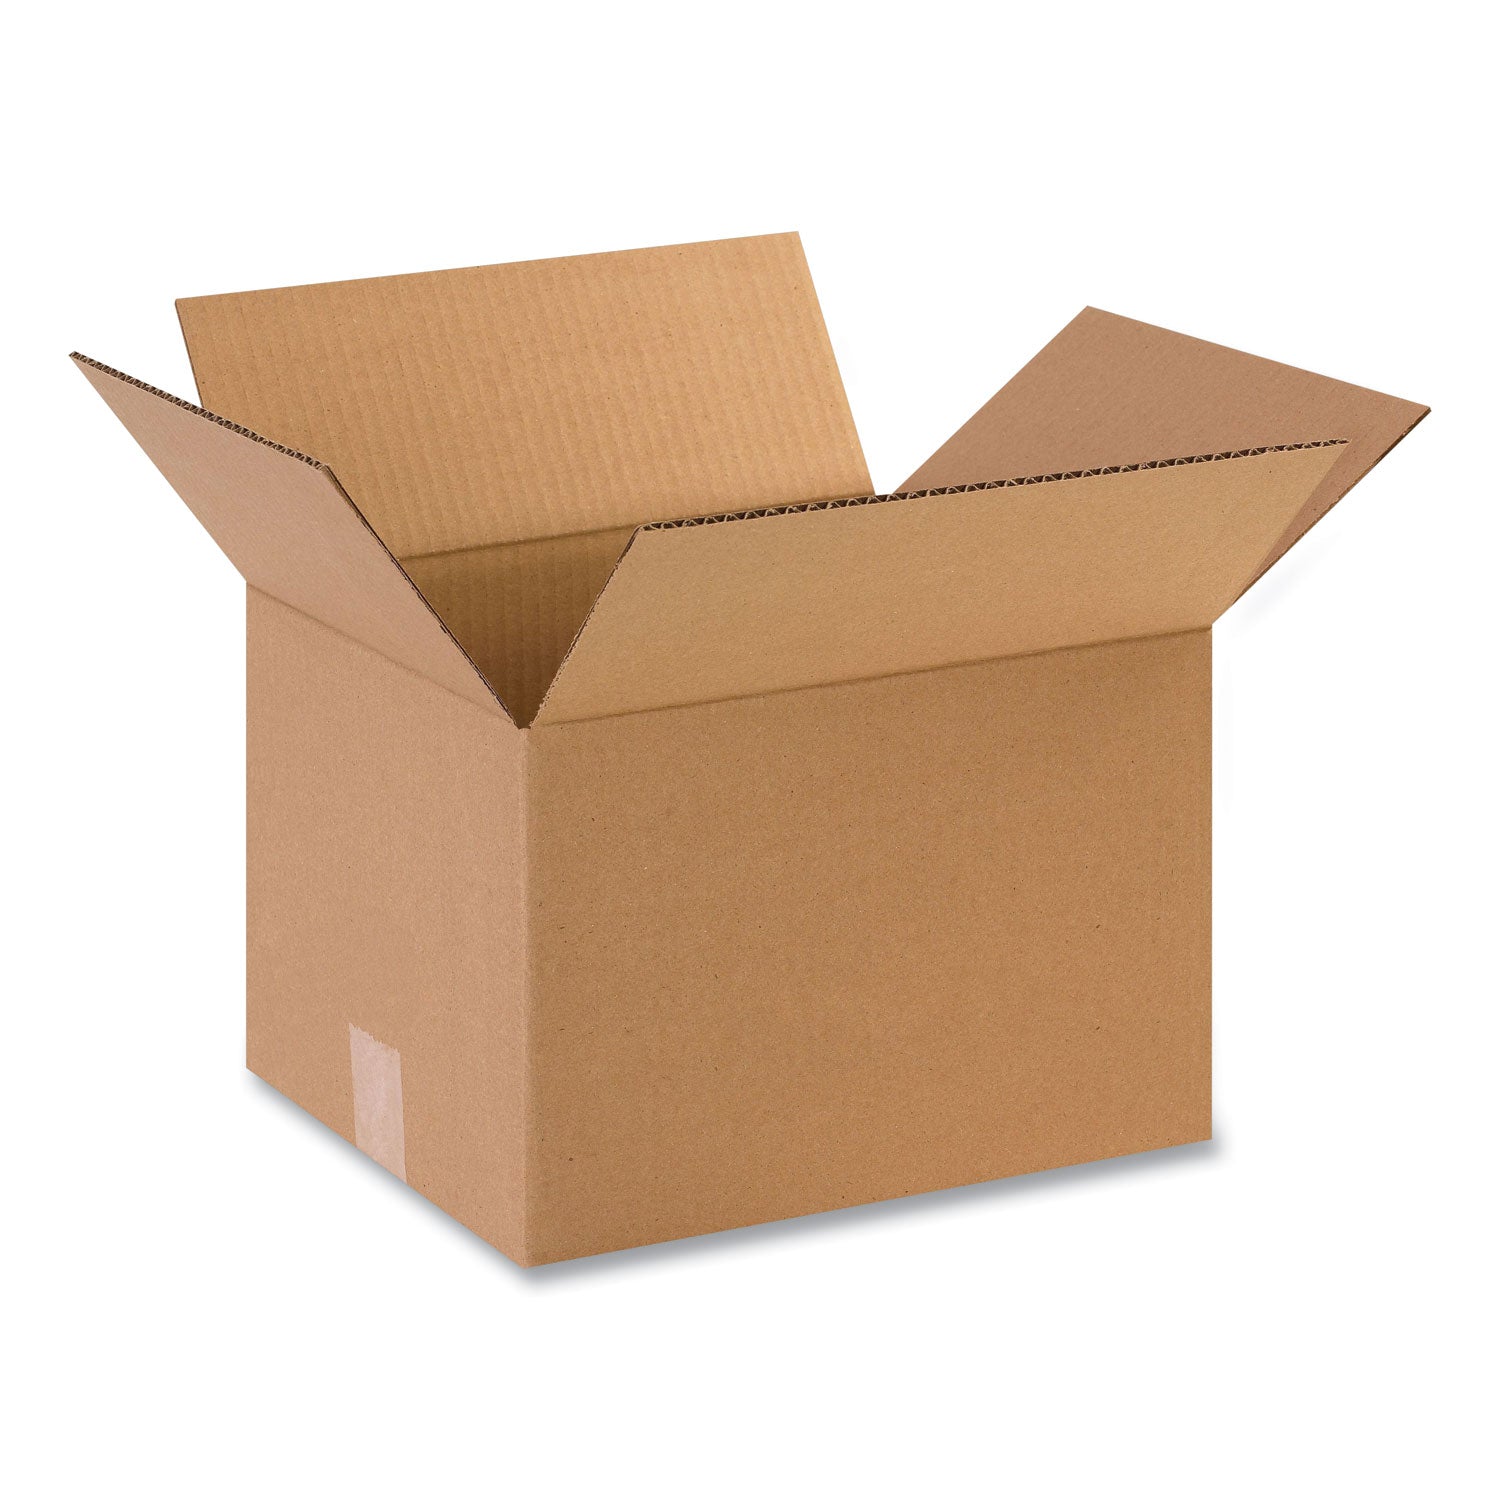 fixed-depth-shipping-boxes-regular-slotted-container-rsc-10-x-12-x-8-brown-kraft-25-bundle_cwz121008 - 1